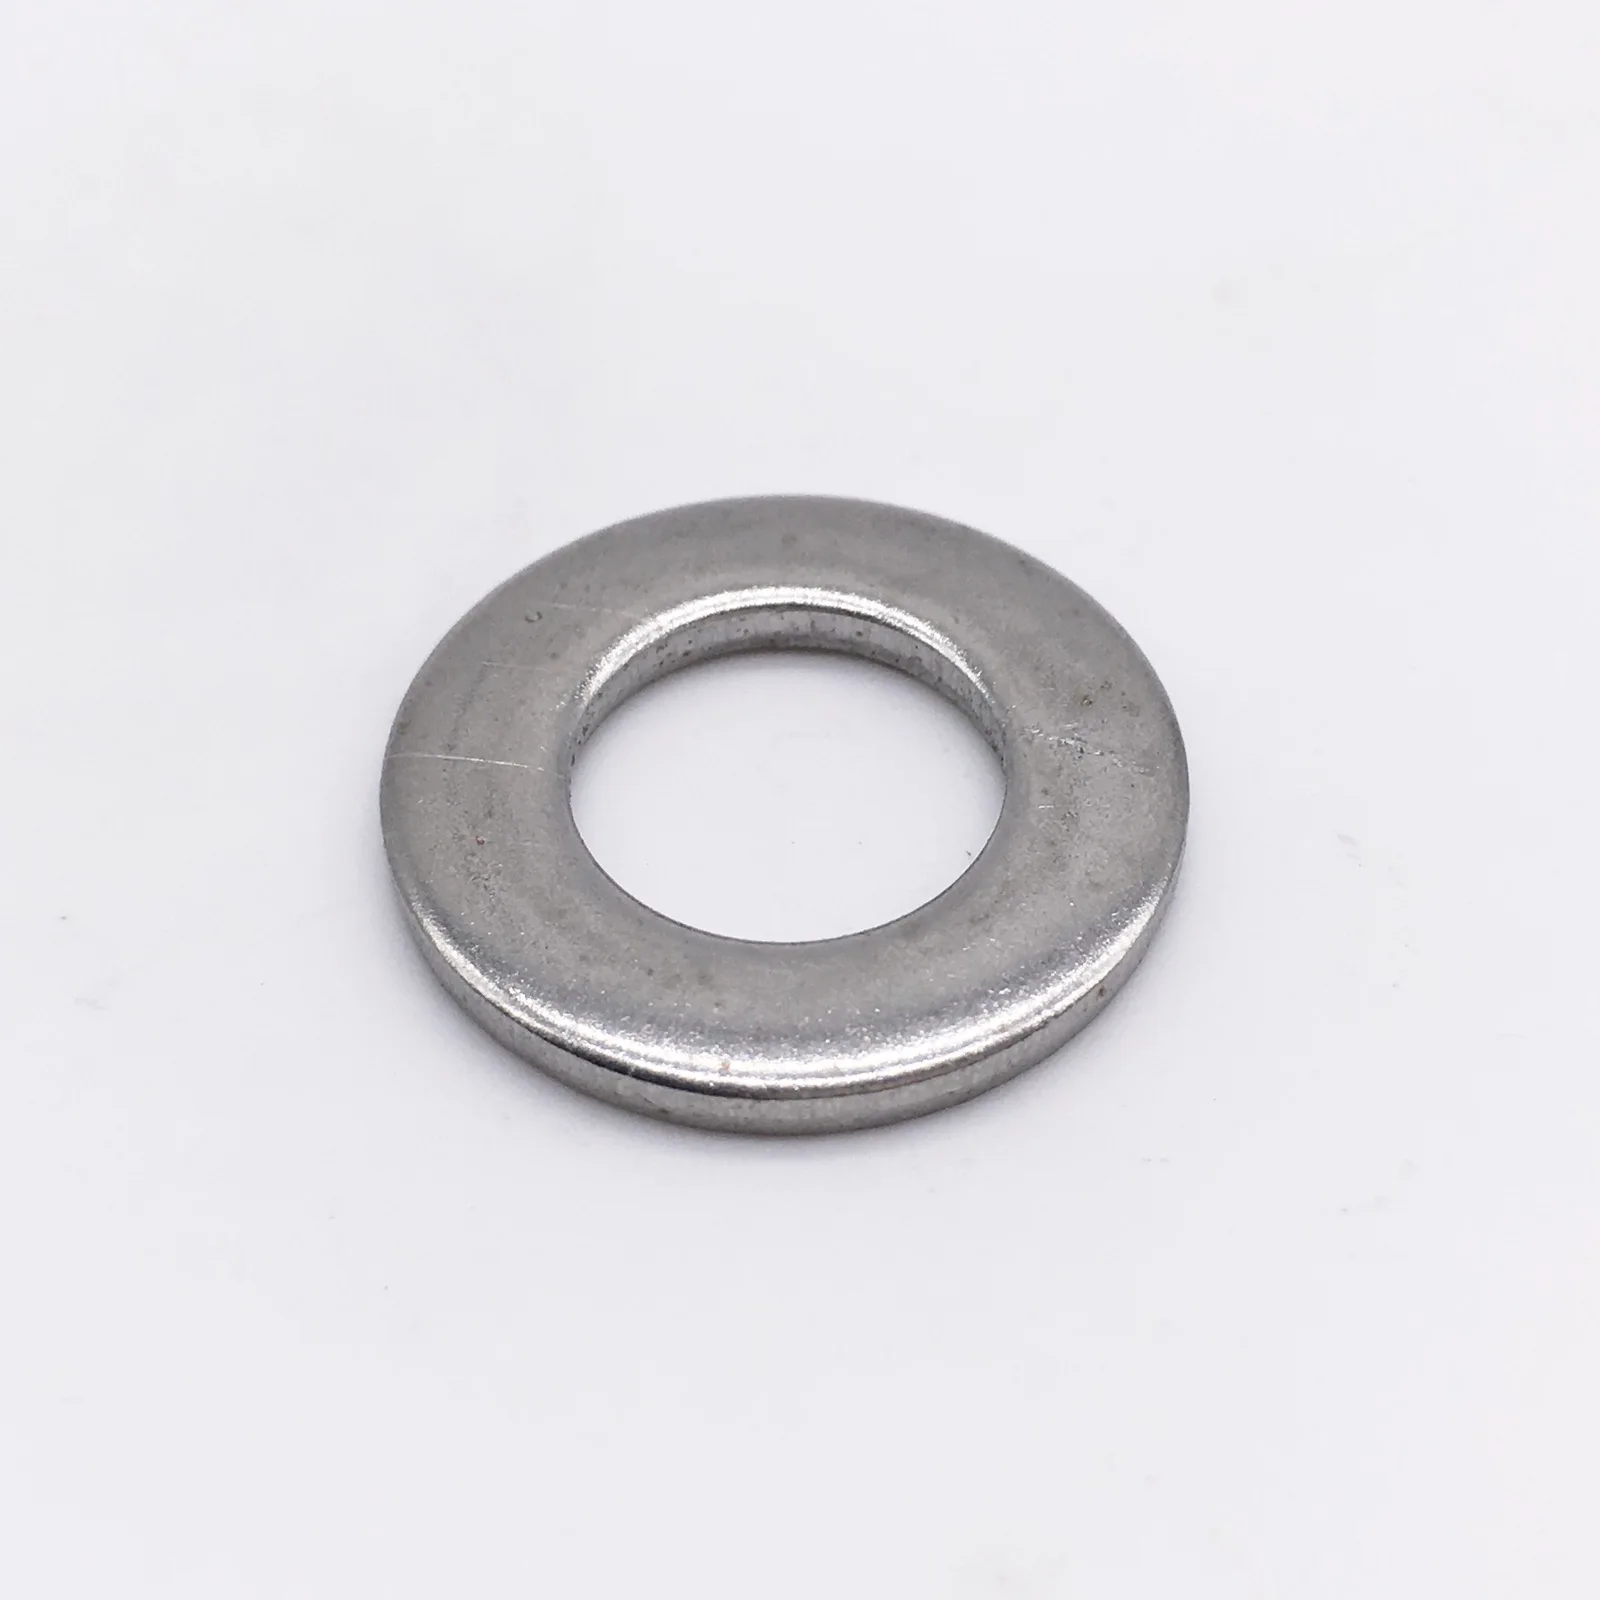 30 x M6 Stainless Steel A2 plain flat washers 6mm DIN 125A 304 grade FREE UK P&P 